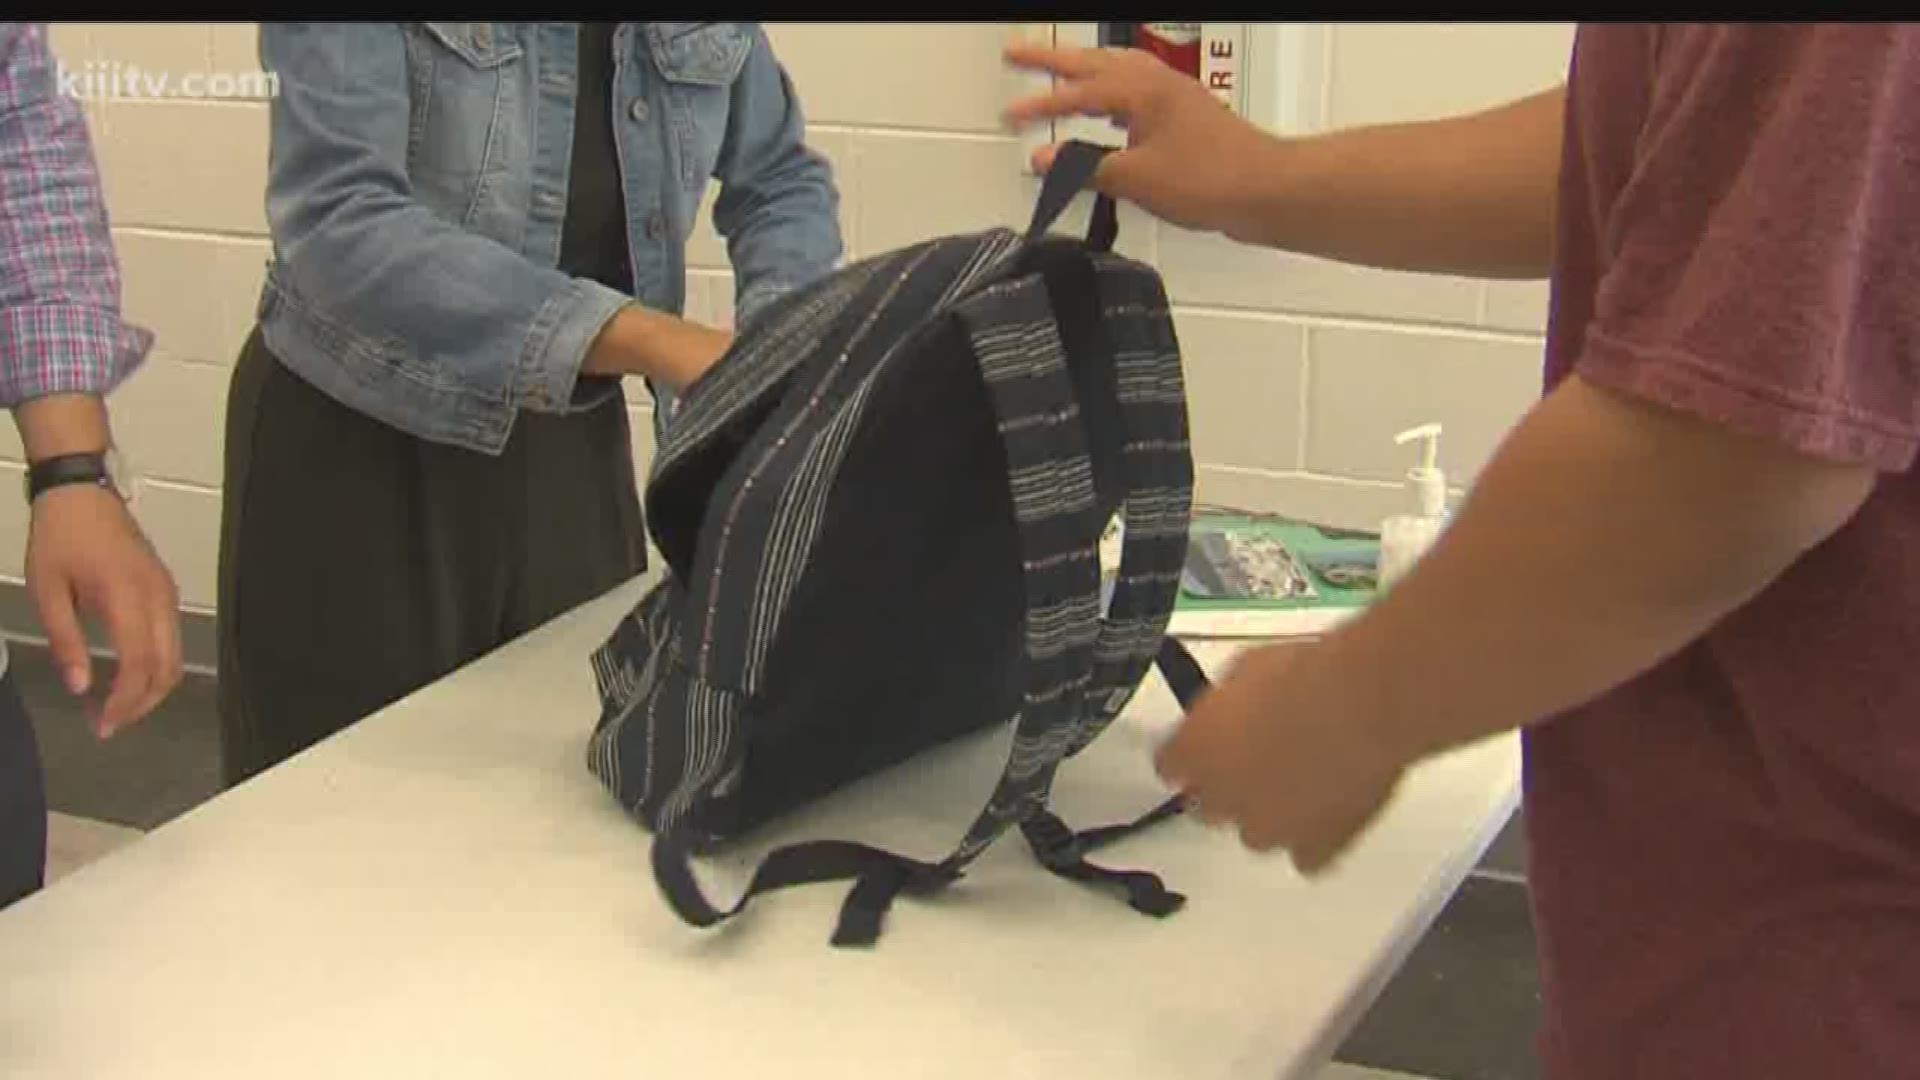 According to CCISD Police Chief Kirby Warnke, the backpack ban goes into effect every spring when there are no classes left and just finals. 